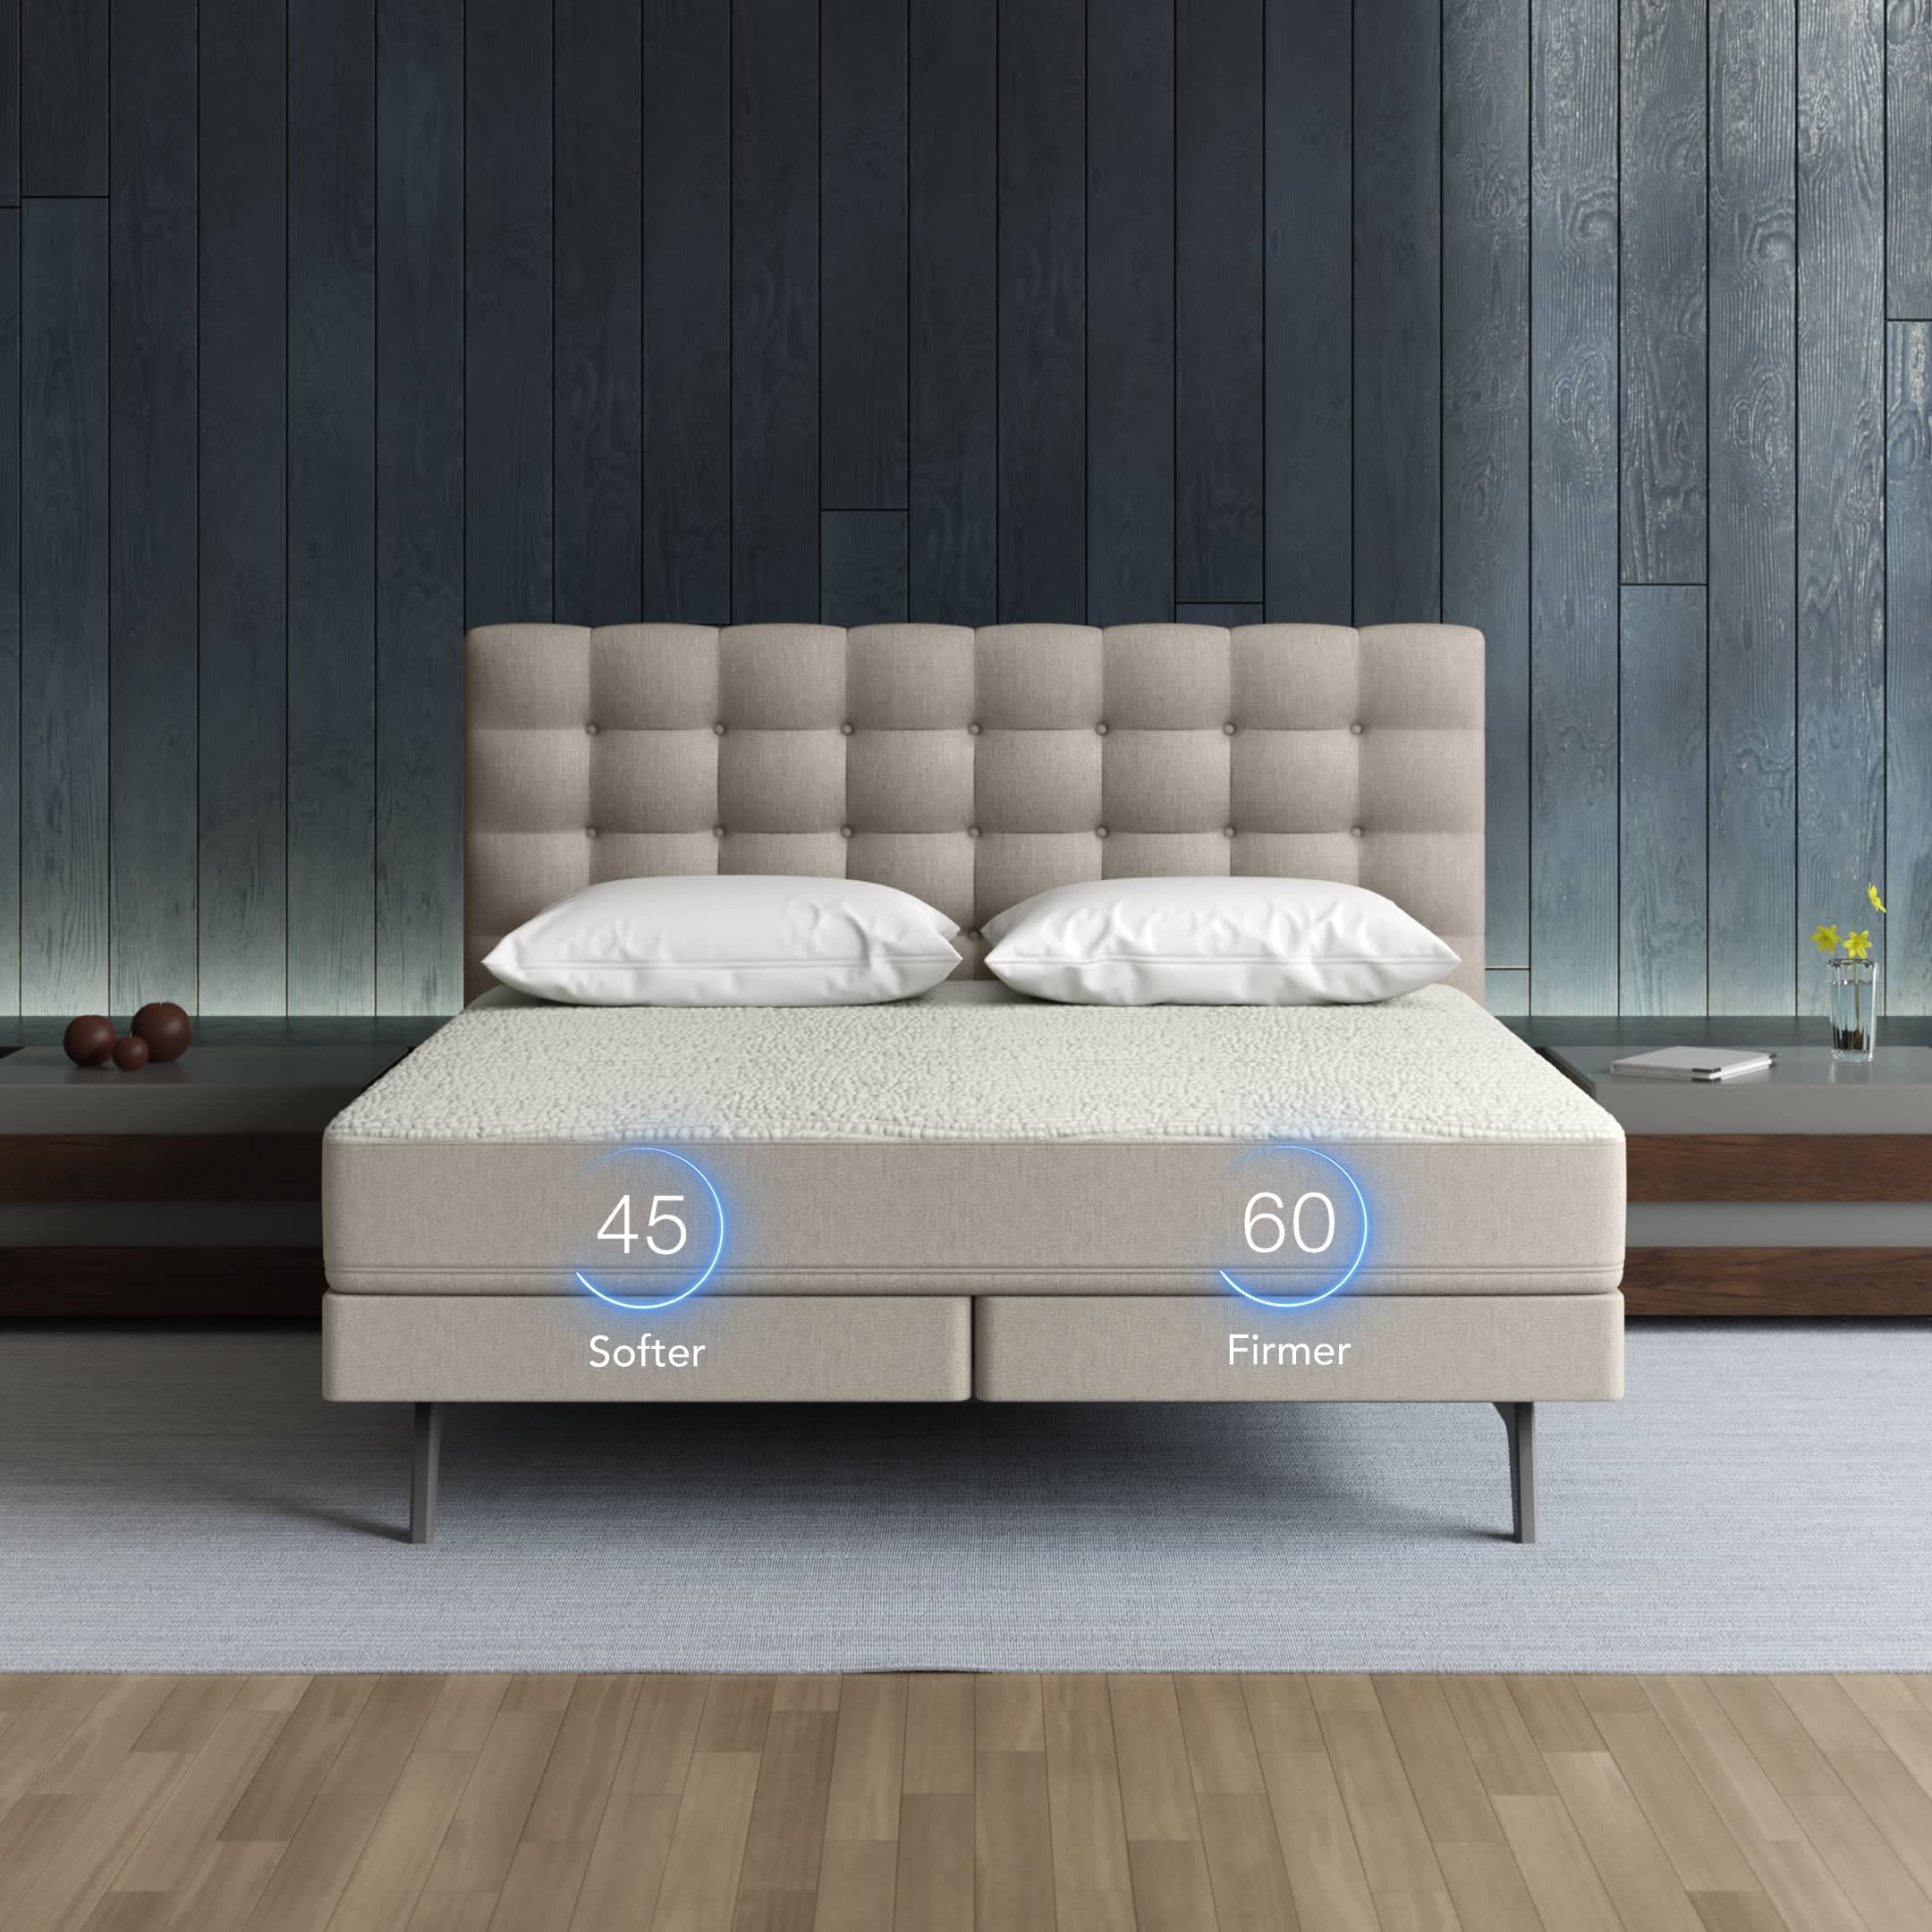 https://cdn.sleepnumber.com/image/upload/f_auto,q_auto:eco/v1695049252/workarea/catalog/product_images/pse/pSE_Gallery_Front_Numbers